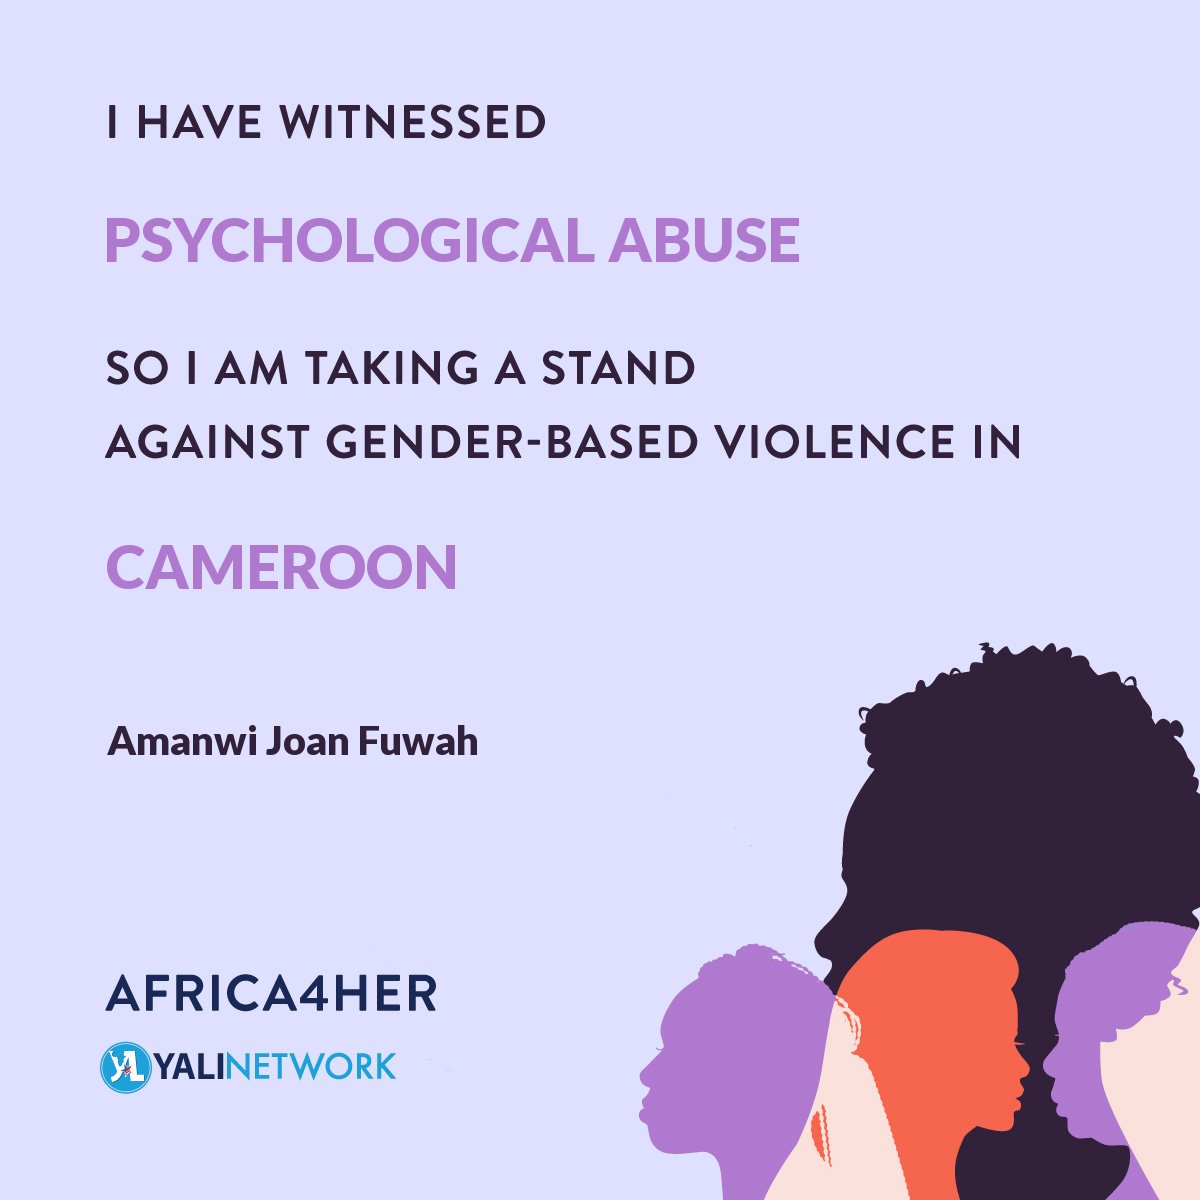 I stand against all forms of Gender Based Violence....most especially that which is unseen.  #psychologicalabuse 
#AFRICA4HER
#YALI